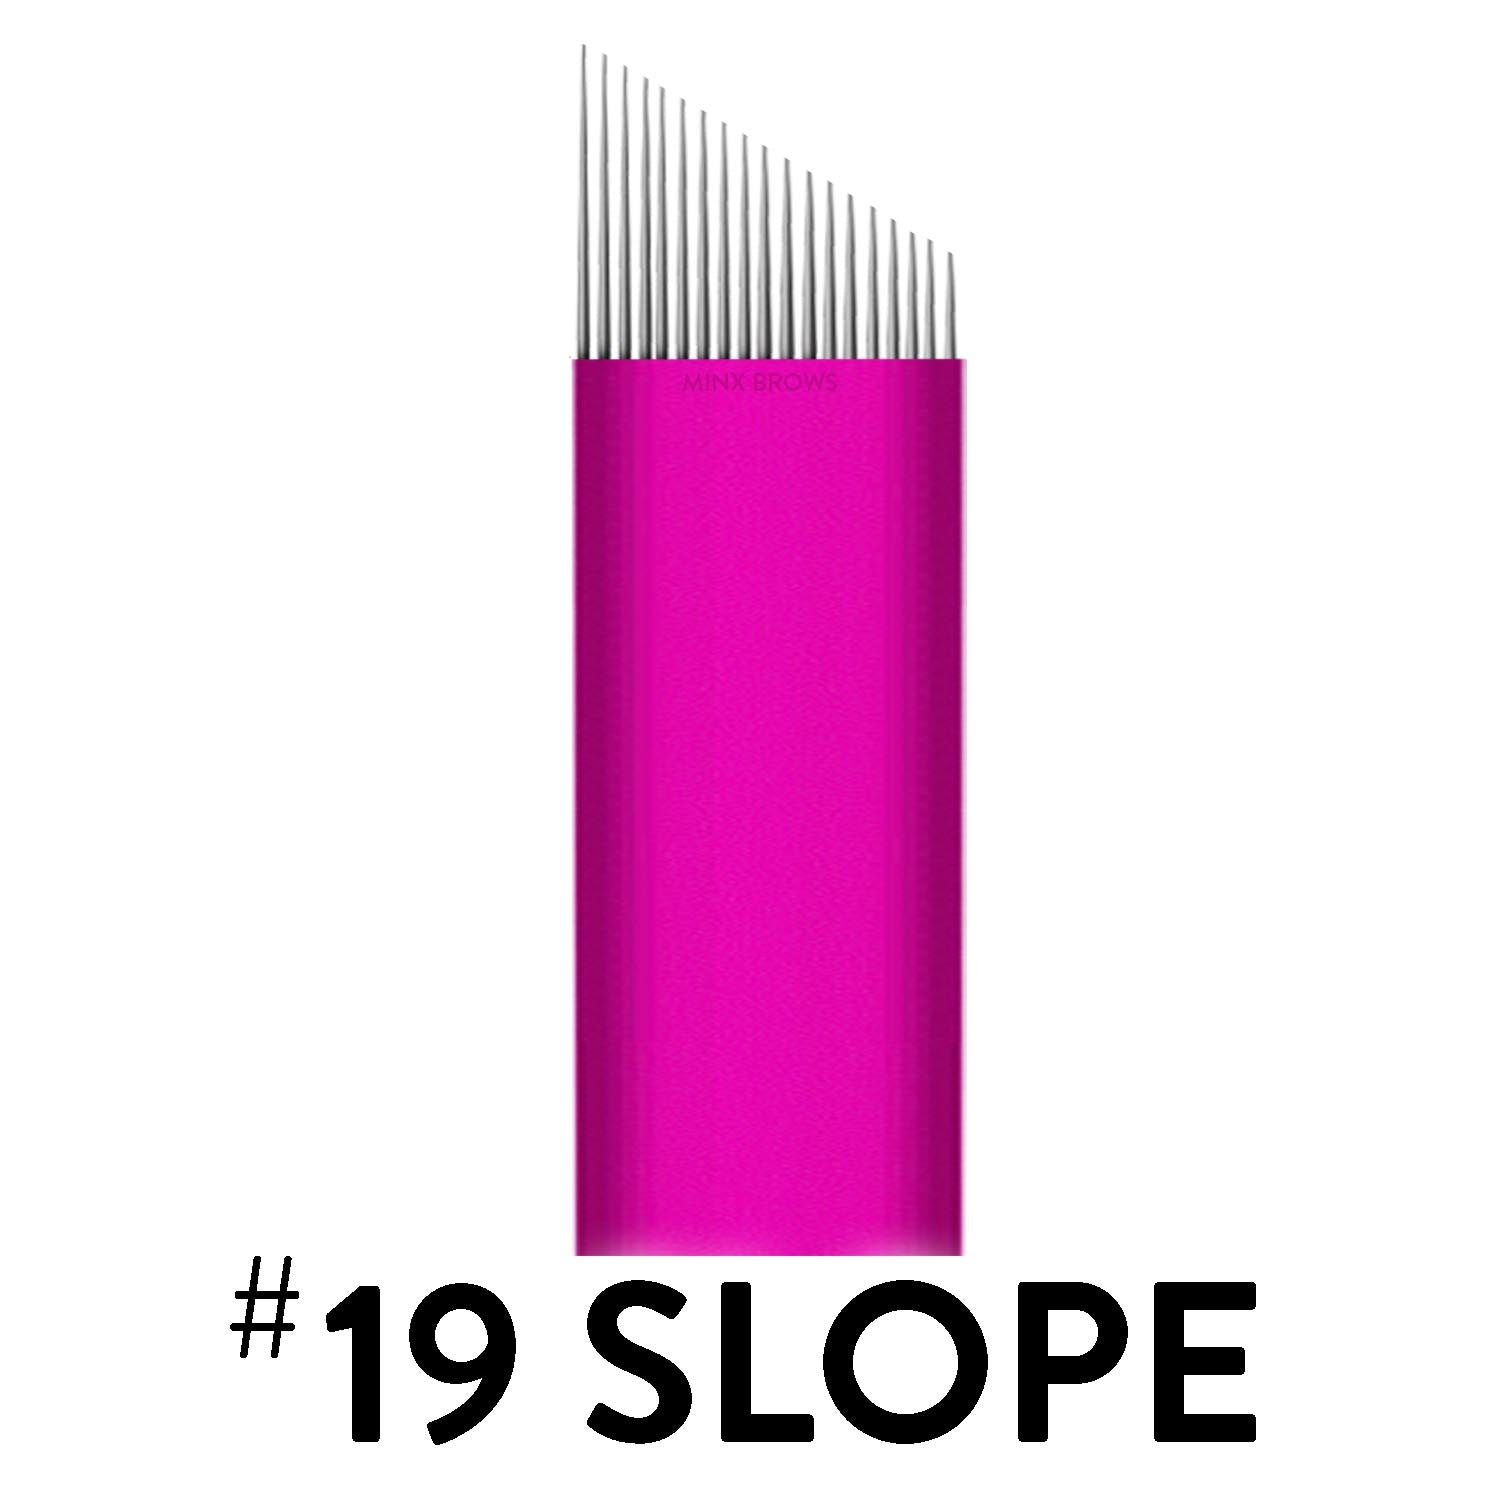 19 Slope - Pink Collection Microblade